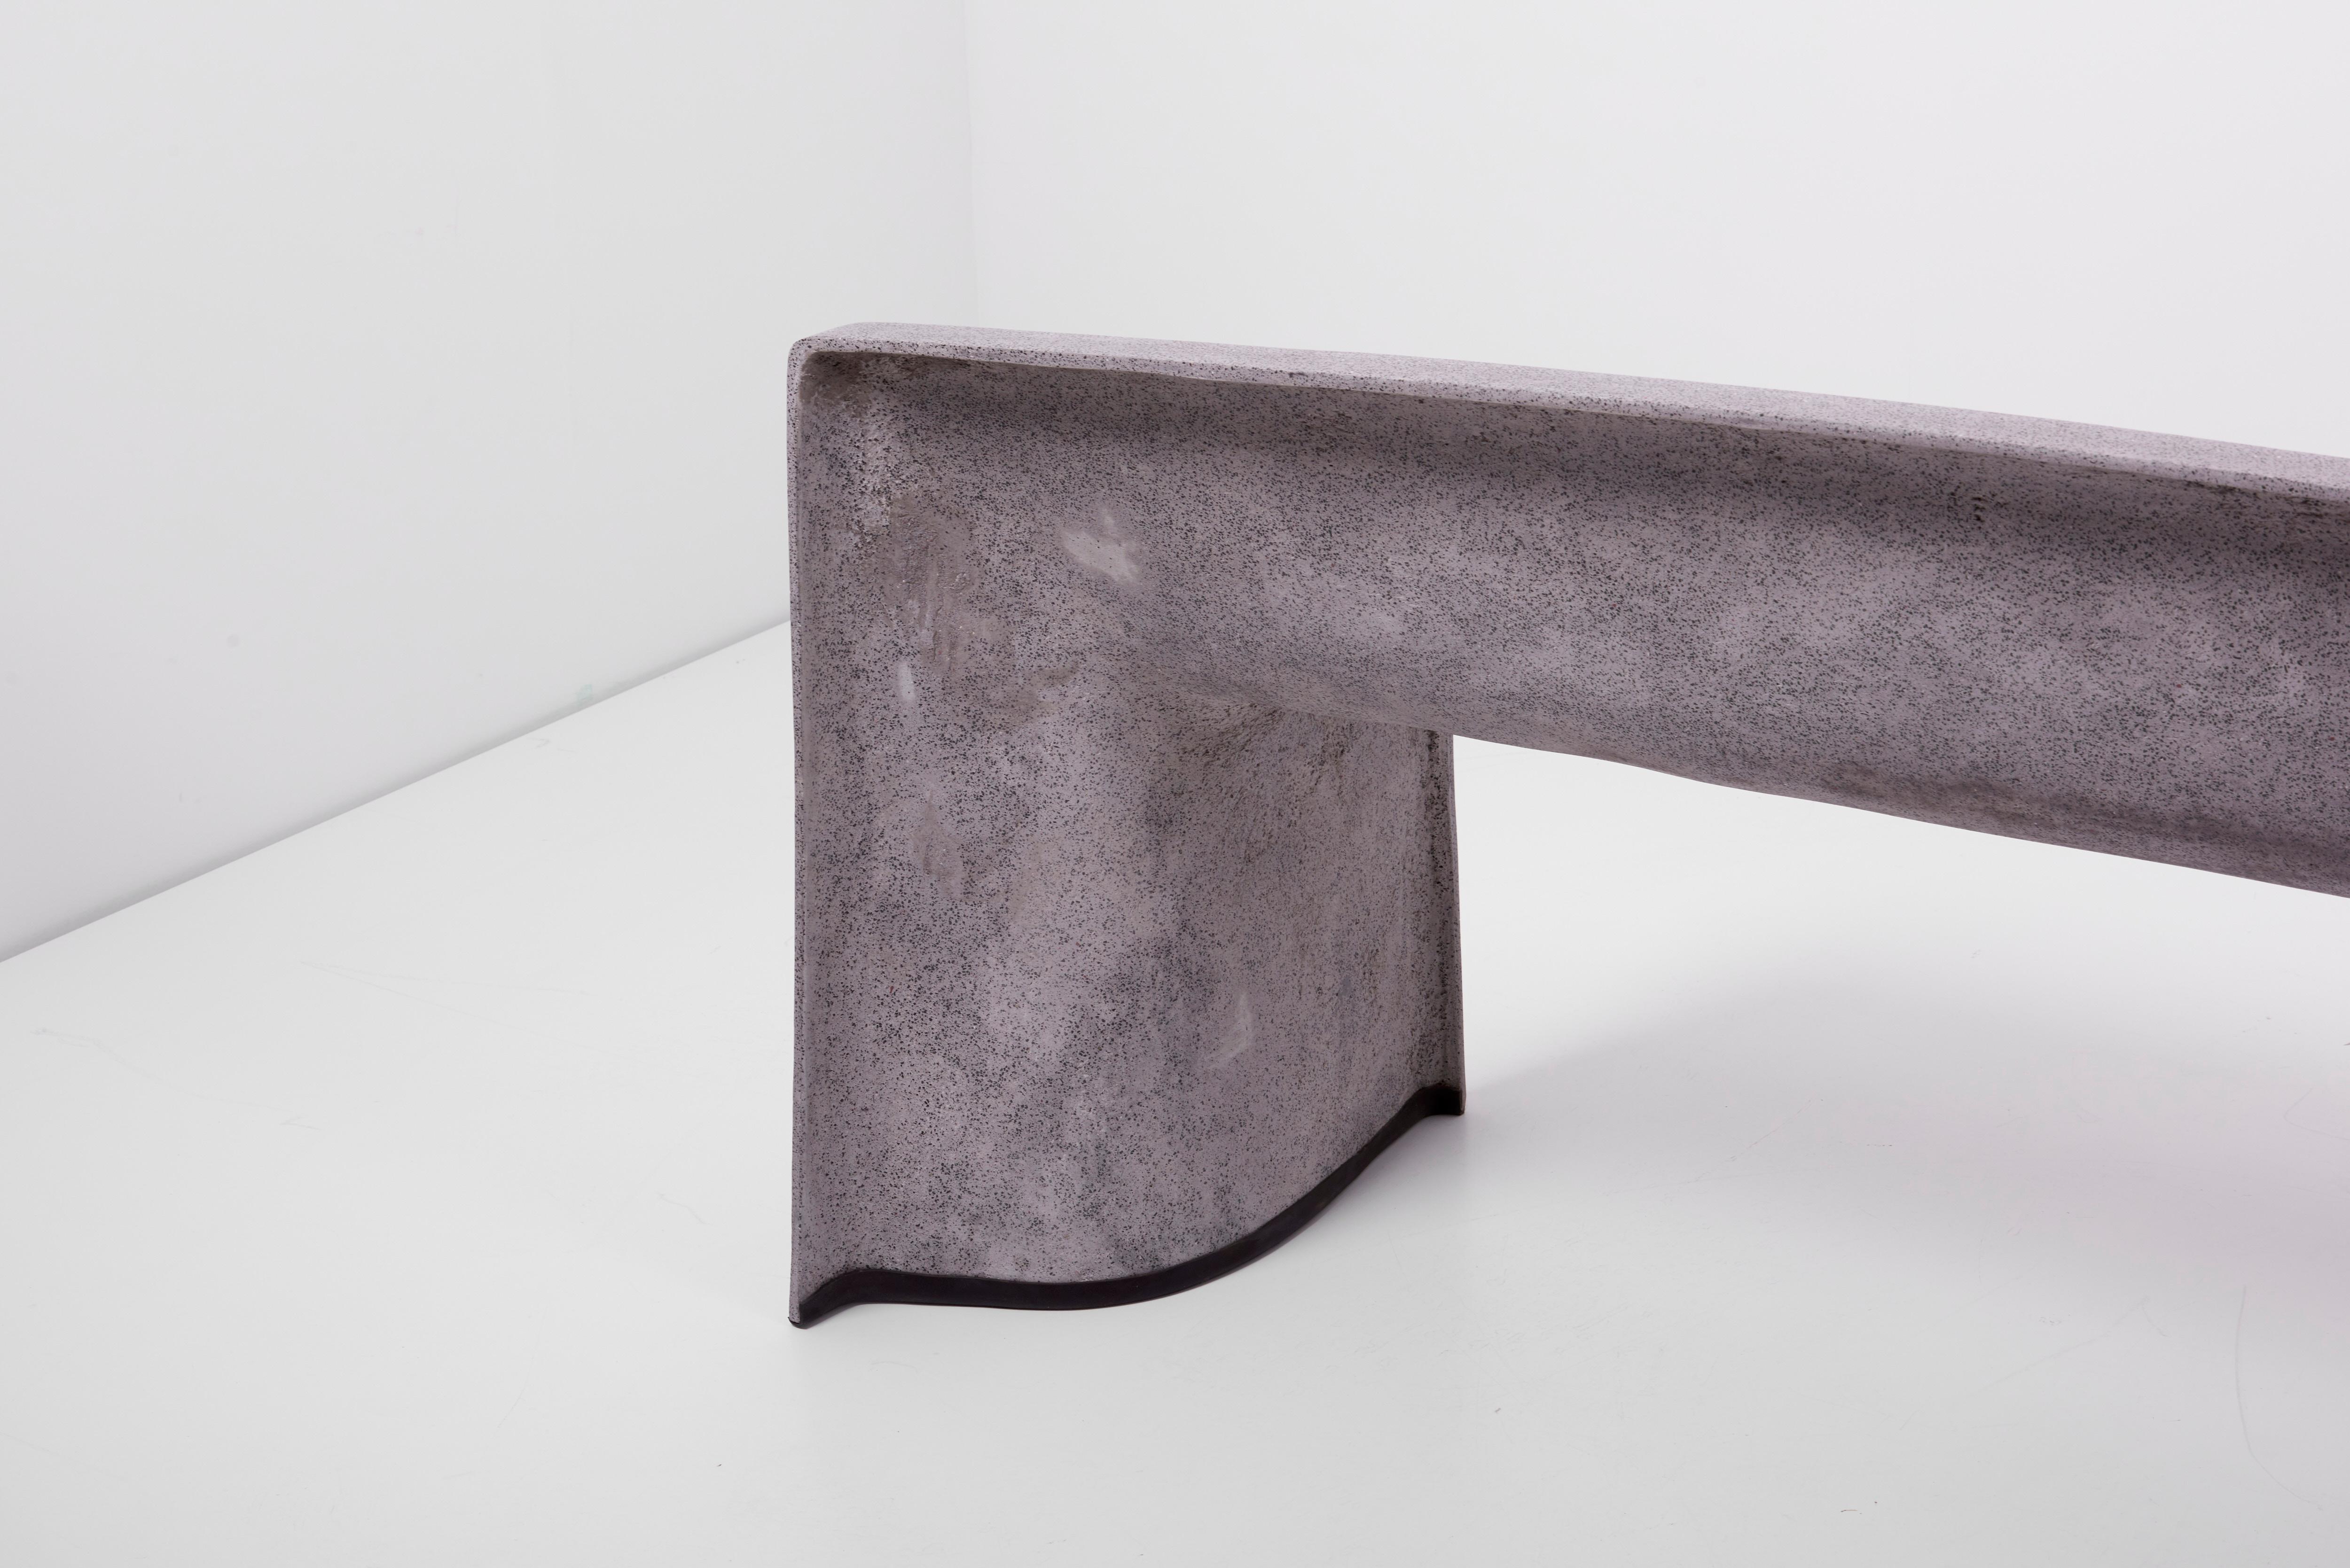 Architectural Concrete Bench by Martin Kleppe, Germany, circa 2011 For Sale 2